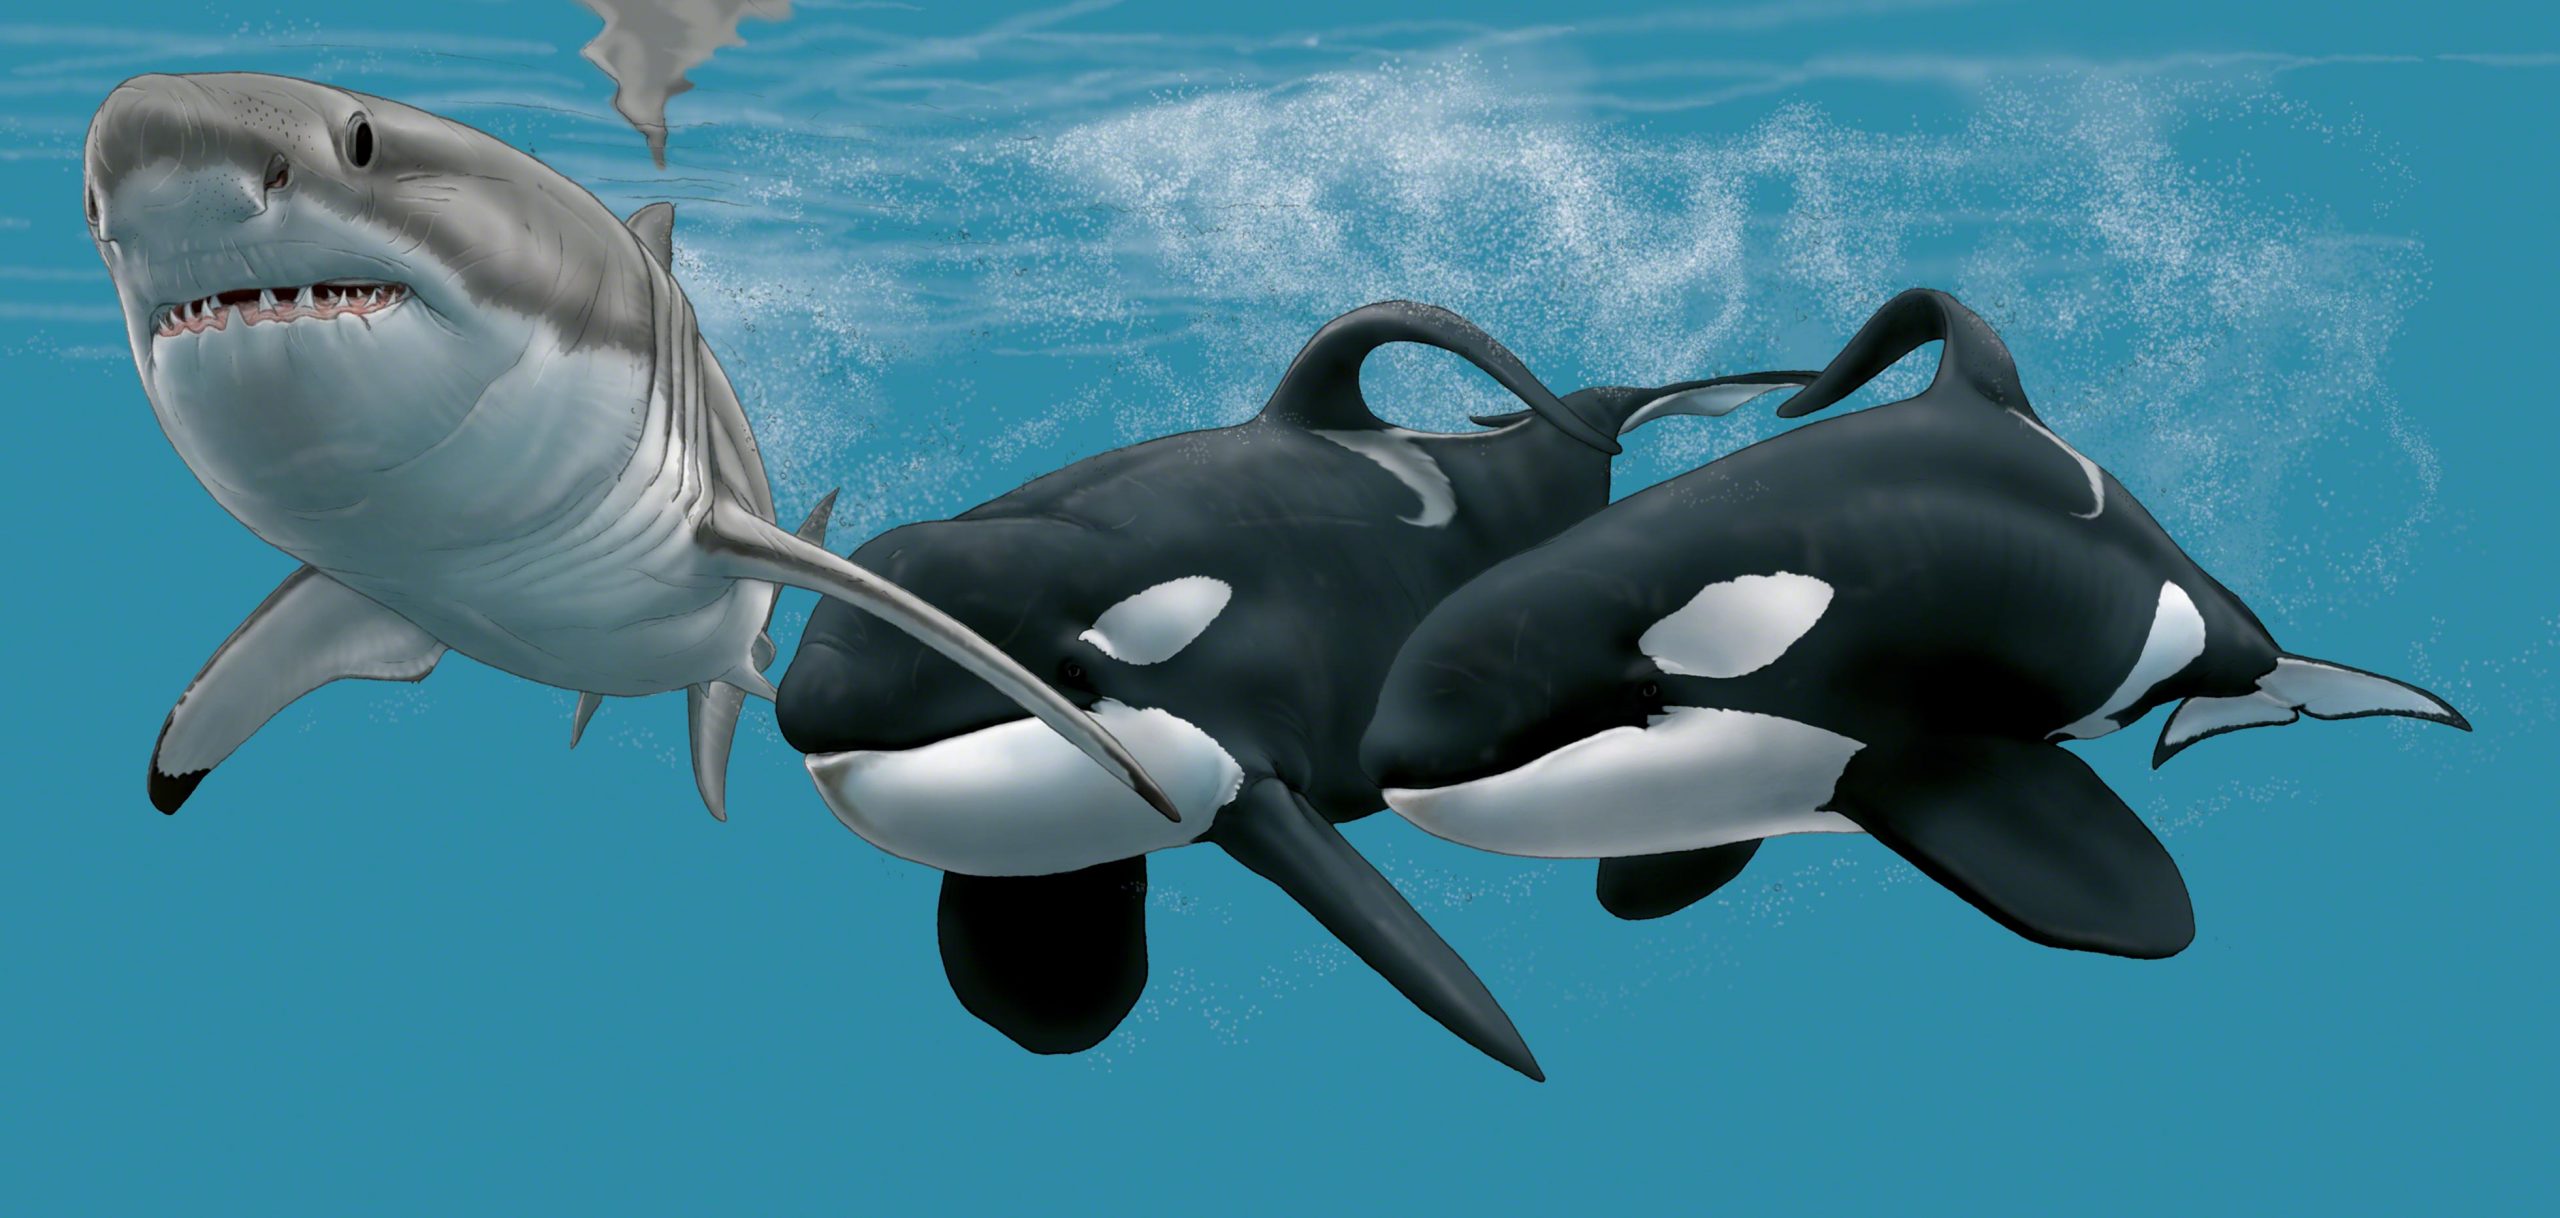 The orcas were named for the direction in which their fins flop: Port to th...